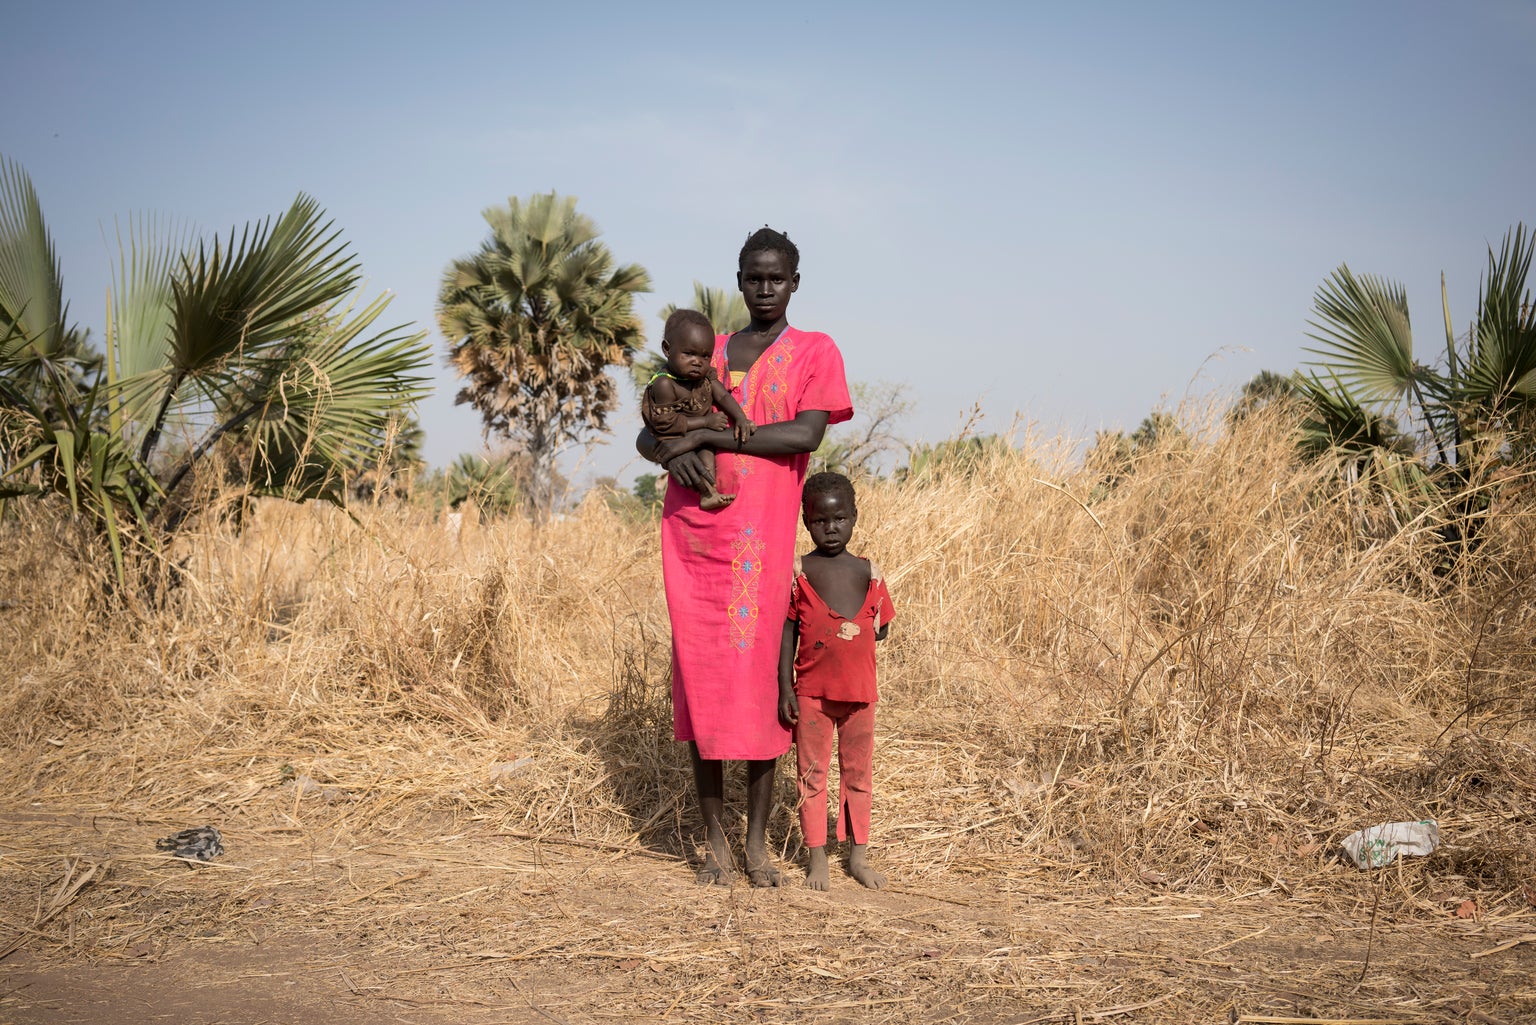 Anyang, 19, holds her one-year-old son Adhel, as her three-year-old daughter stands next to her in Apada village where they live on the outskirts of Aweil town, South Sudan